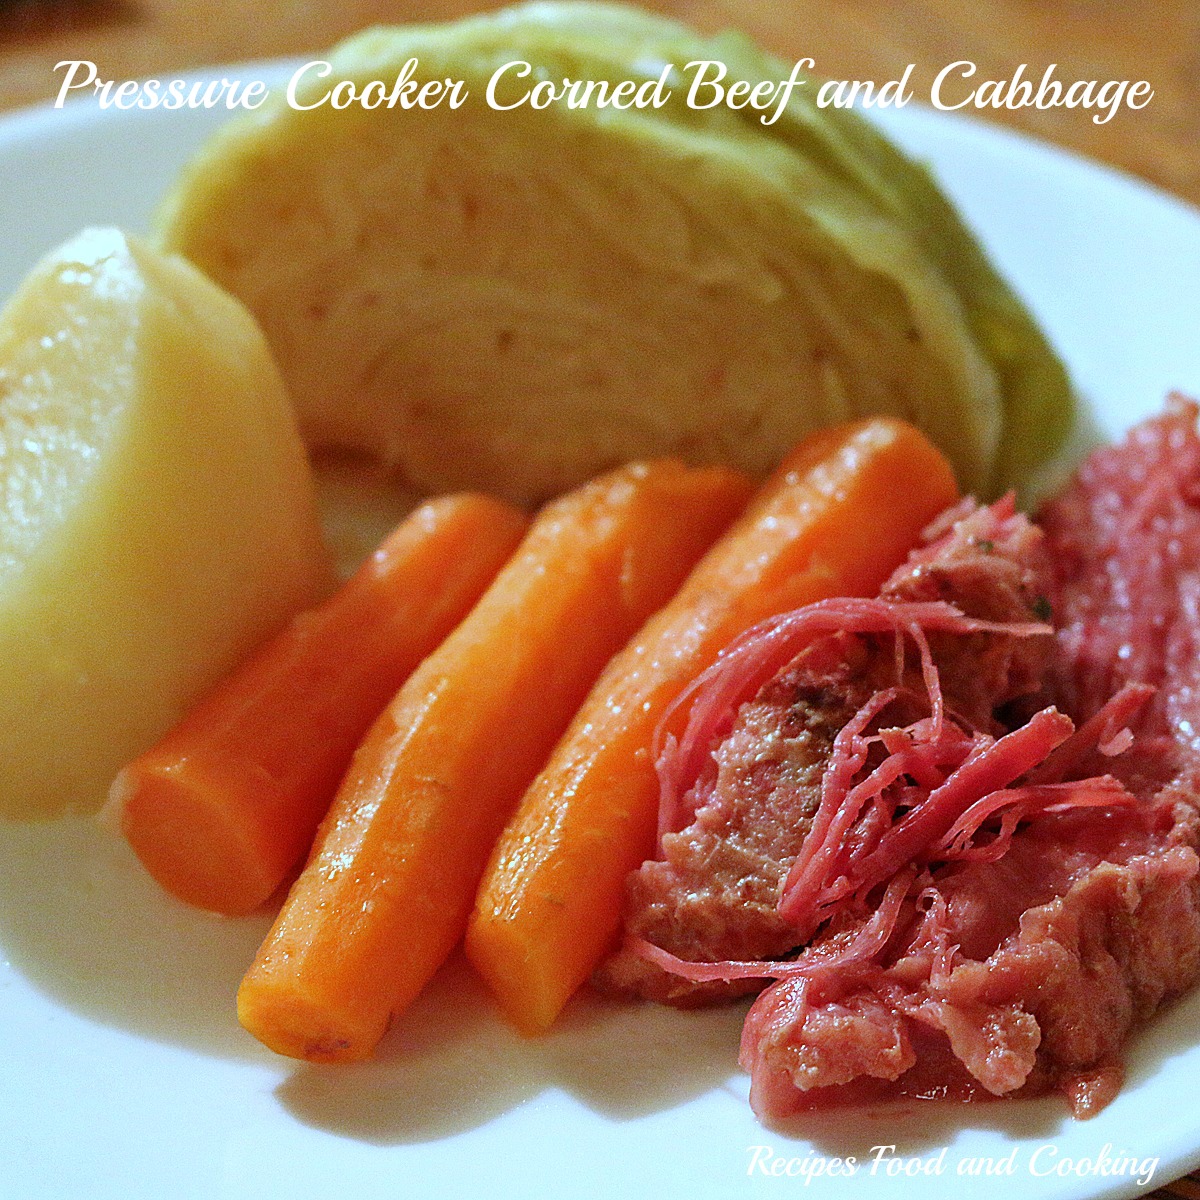 Pressure Cooker Corned Beef With Cabbage Carrots And Potatoes,Black Rose Meaningful Rose Tattoos For Men